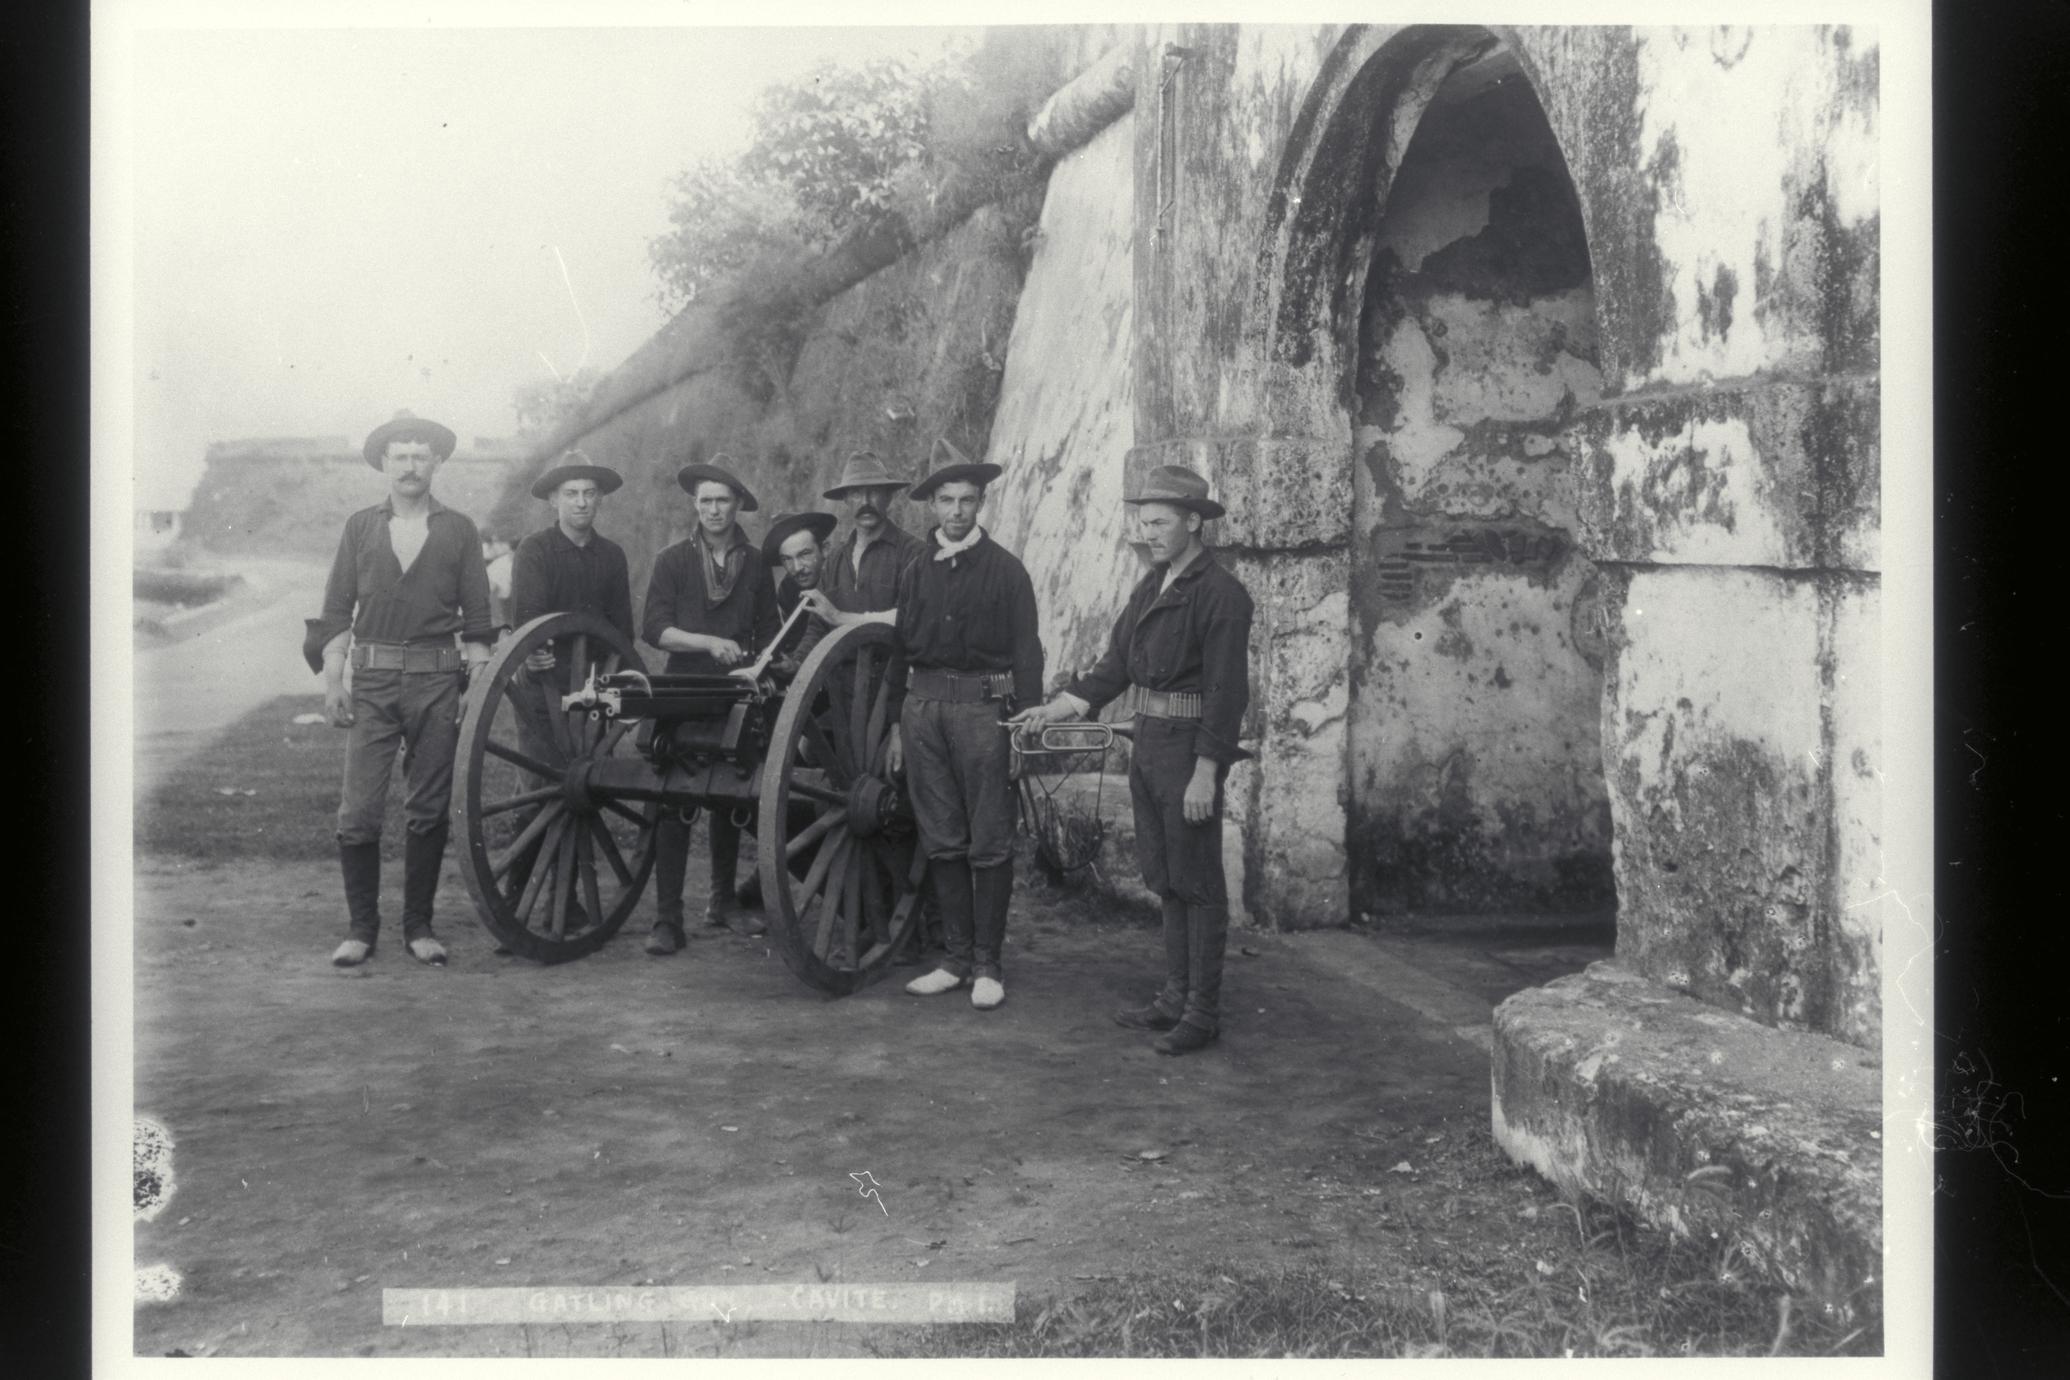 U.S. soldiers pose next to a Gatling gun next to the city walls, Cavite, 1899